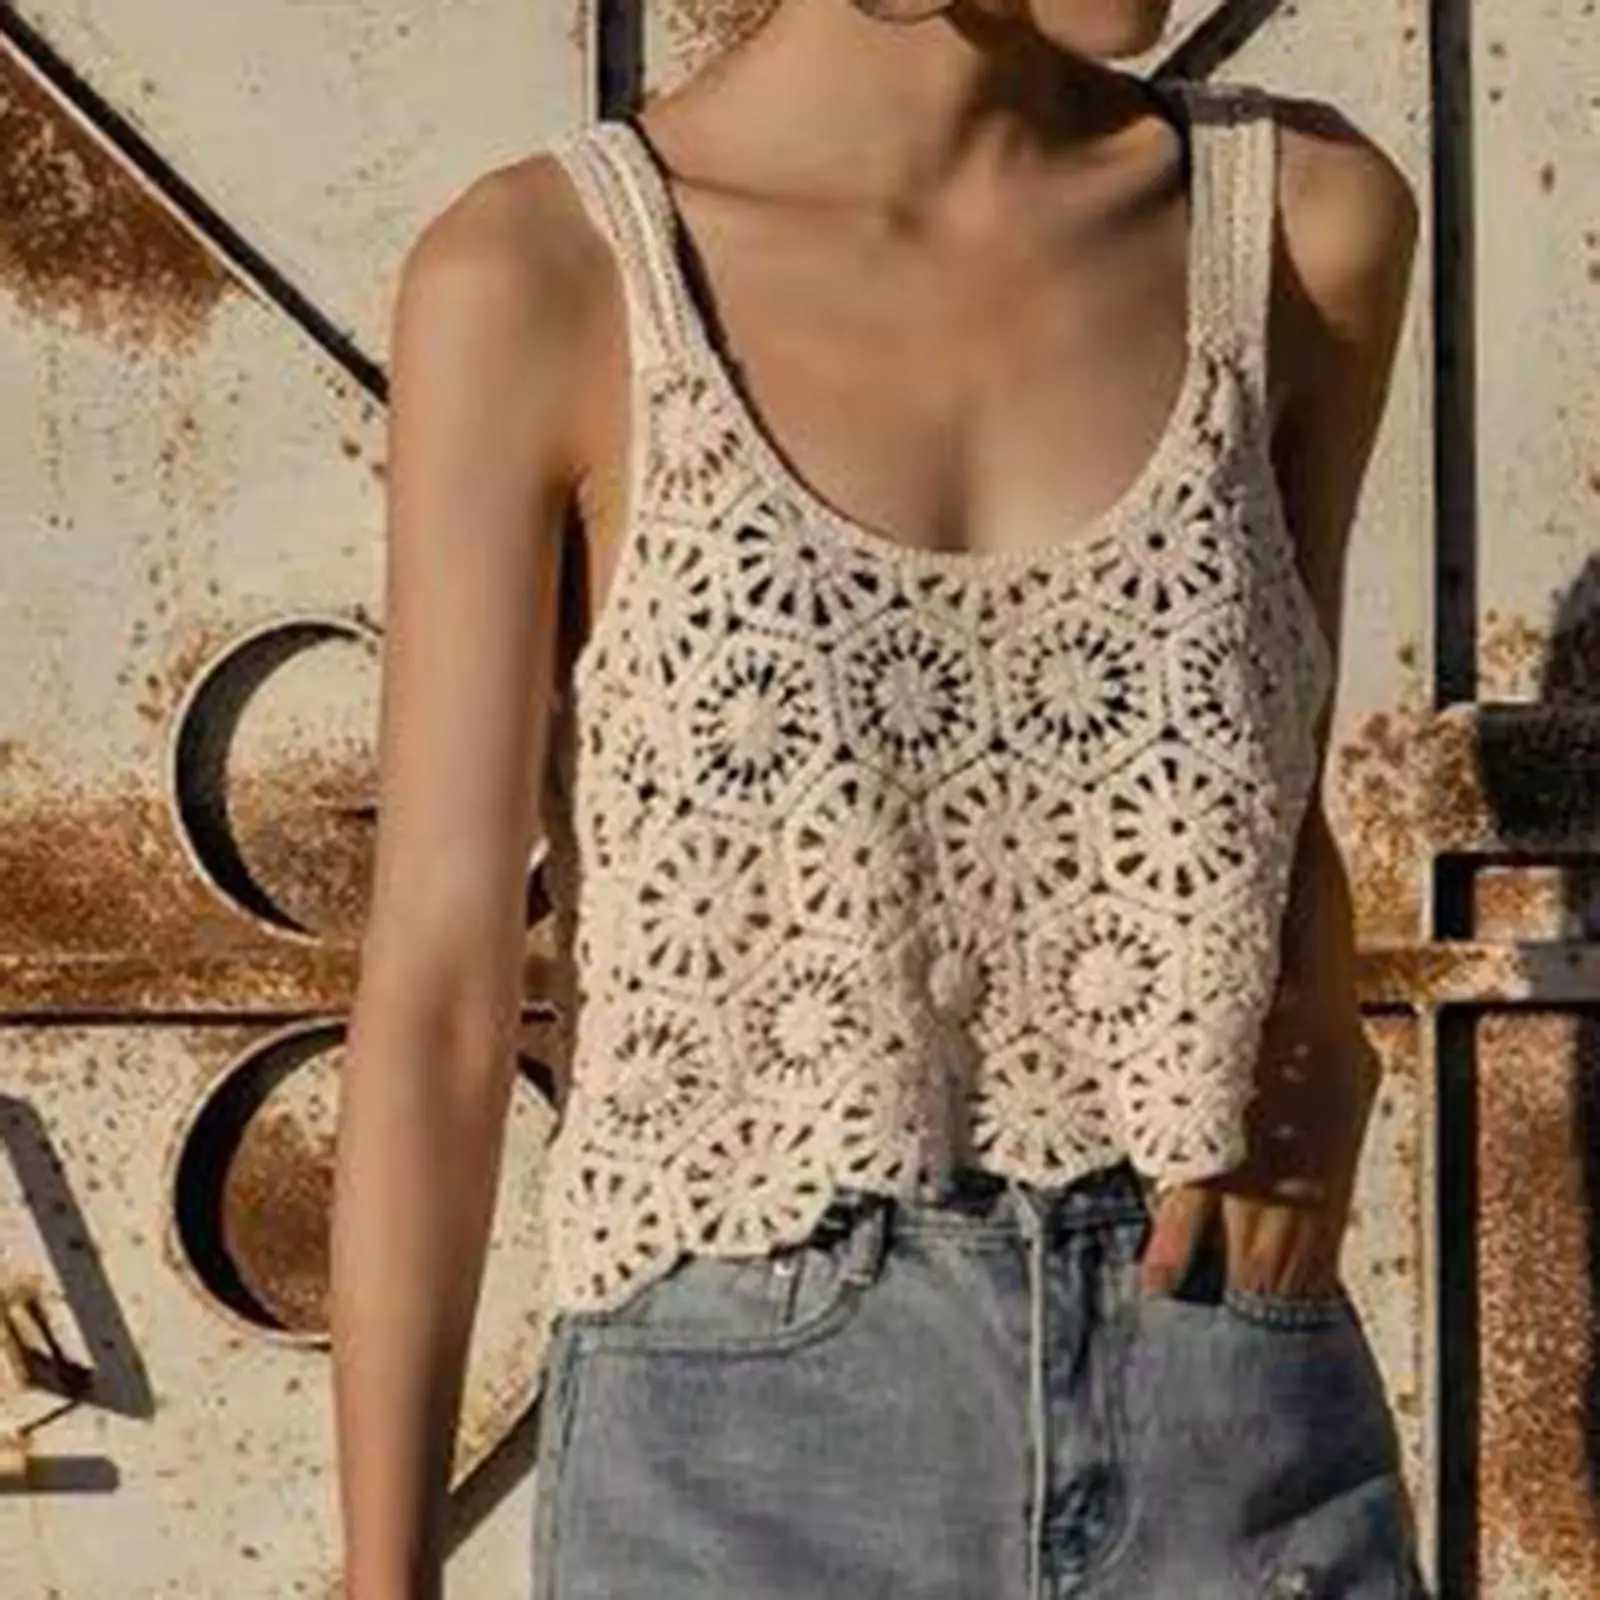  Women Hollow Out Tank Tops Camisole Corset Color Sleeveless Loose Crop Tops Knitted Floral Print Bohemian Female Girls